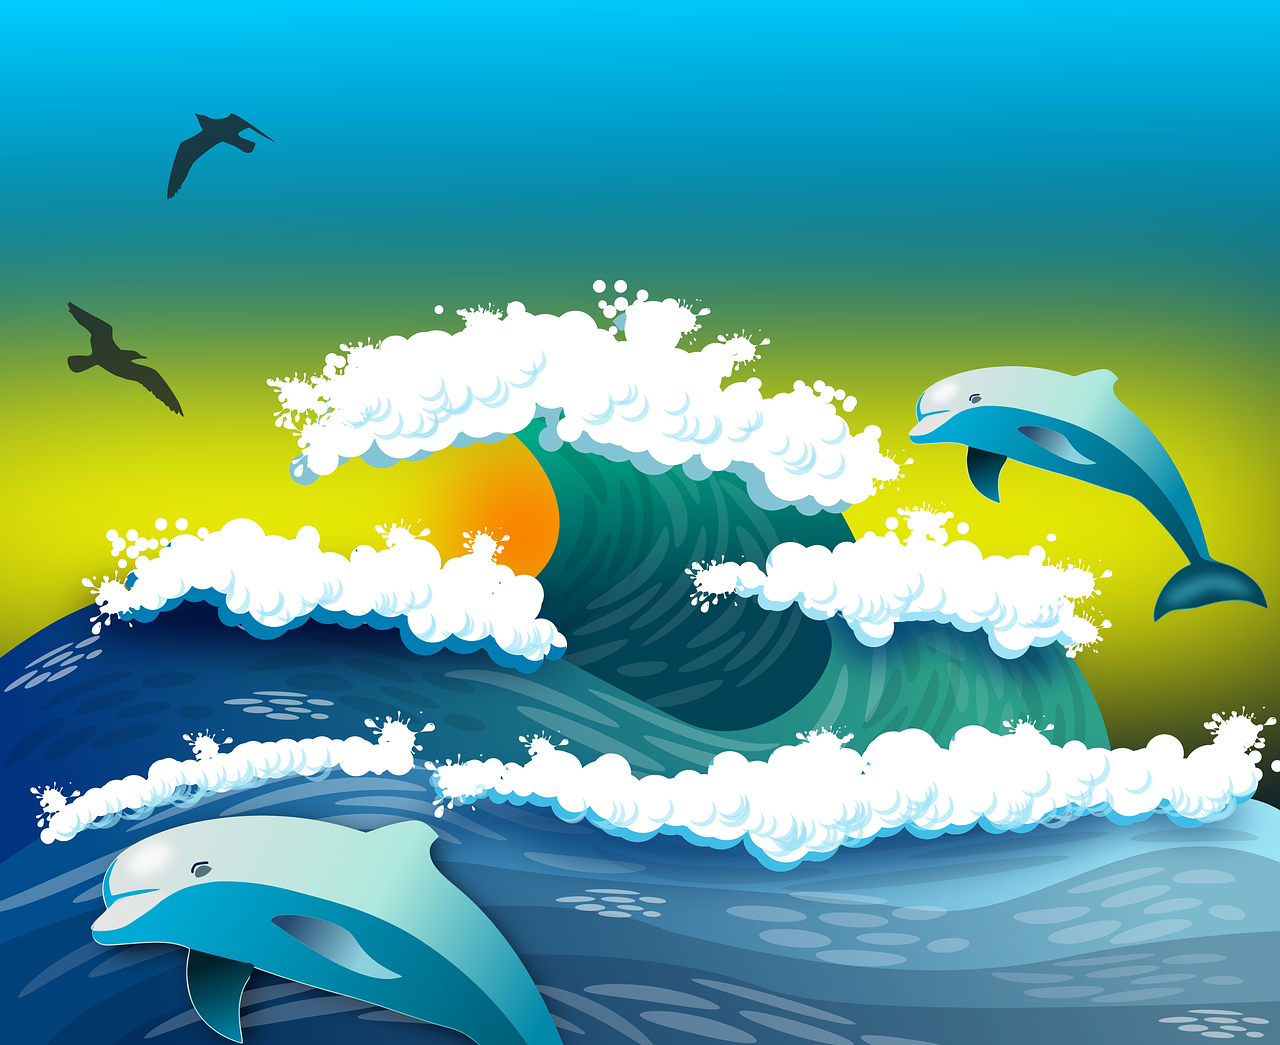 two dolphins jumping out of the ocean waves, an illustration of, shutterstock, a beautiful artwork illustration, big wave and foam, sunset illustration, full color illustration